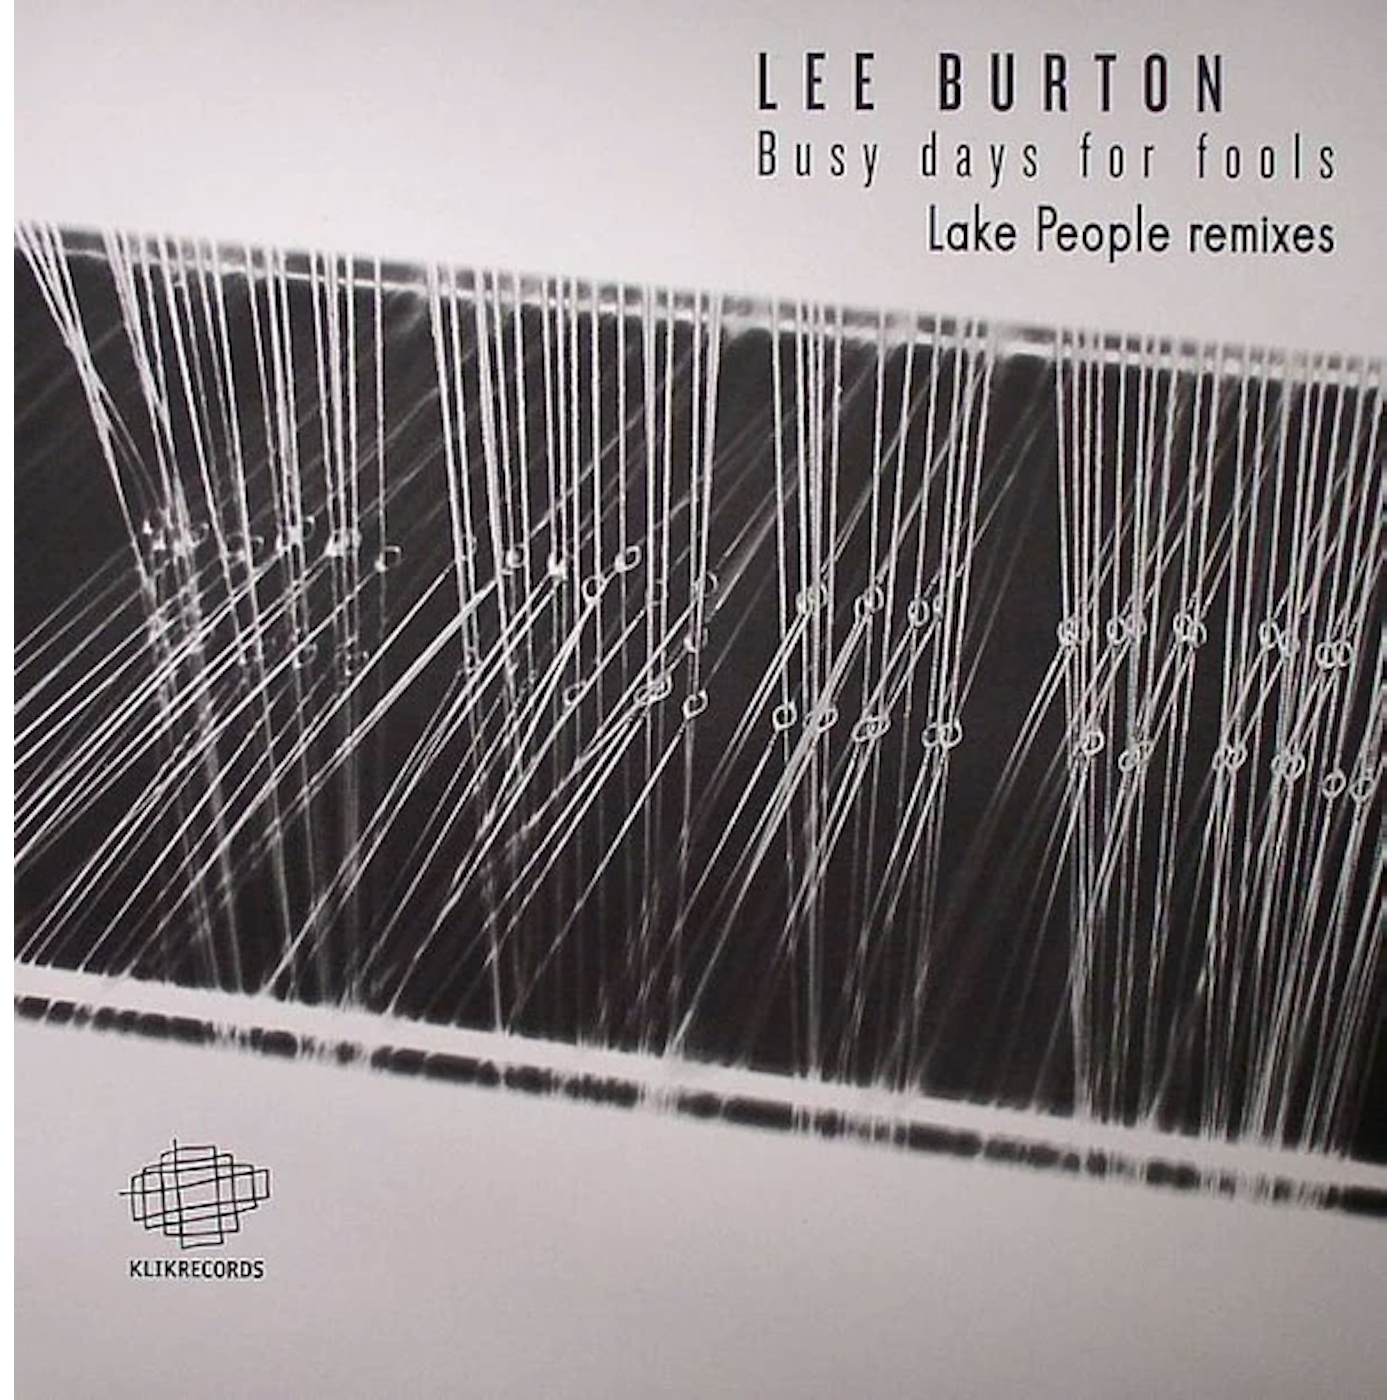 Lee Burton Busy Days For Fools (Lake People Remixes) Vinyl Record